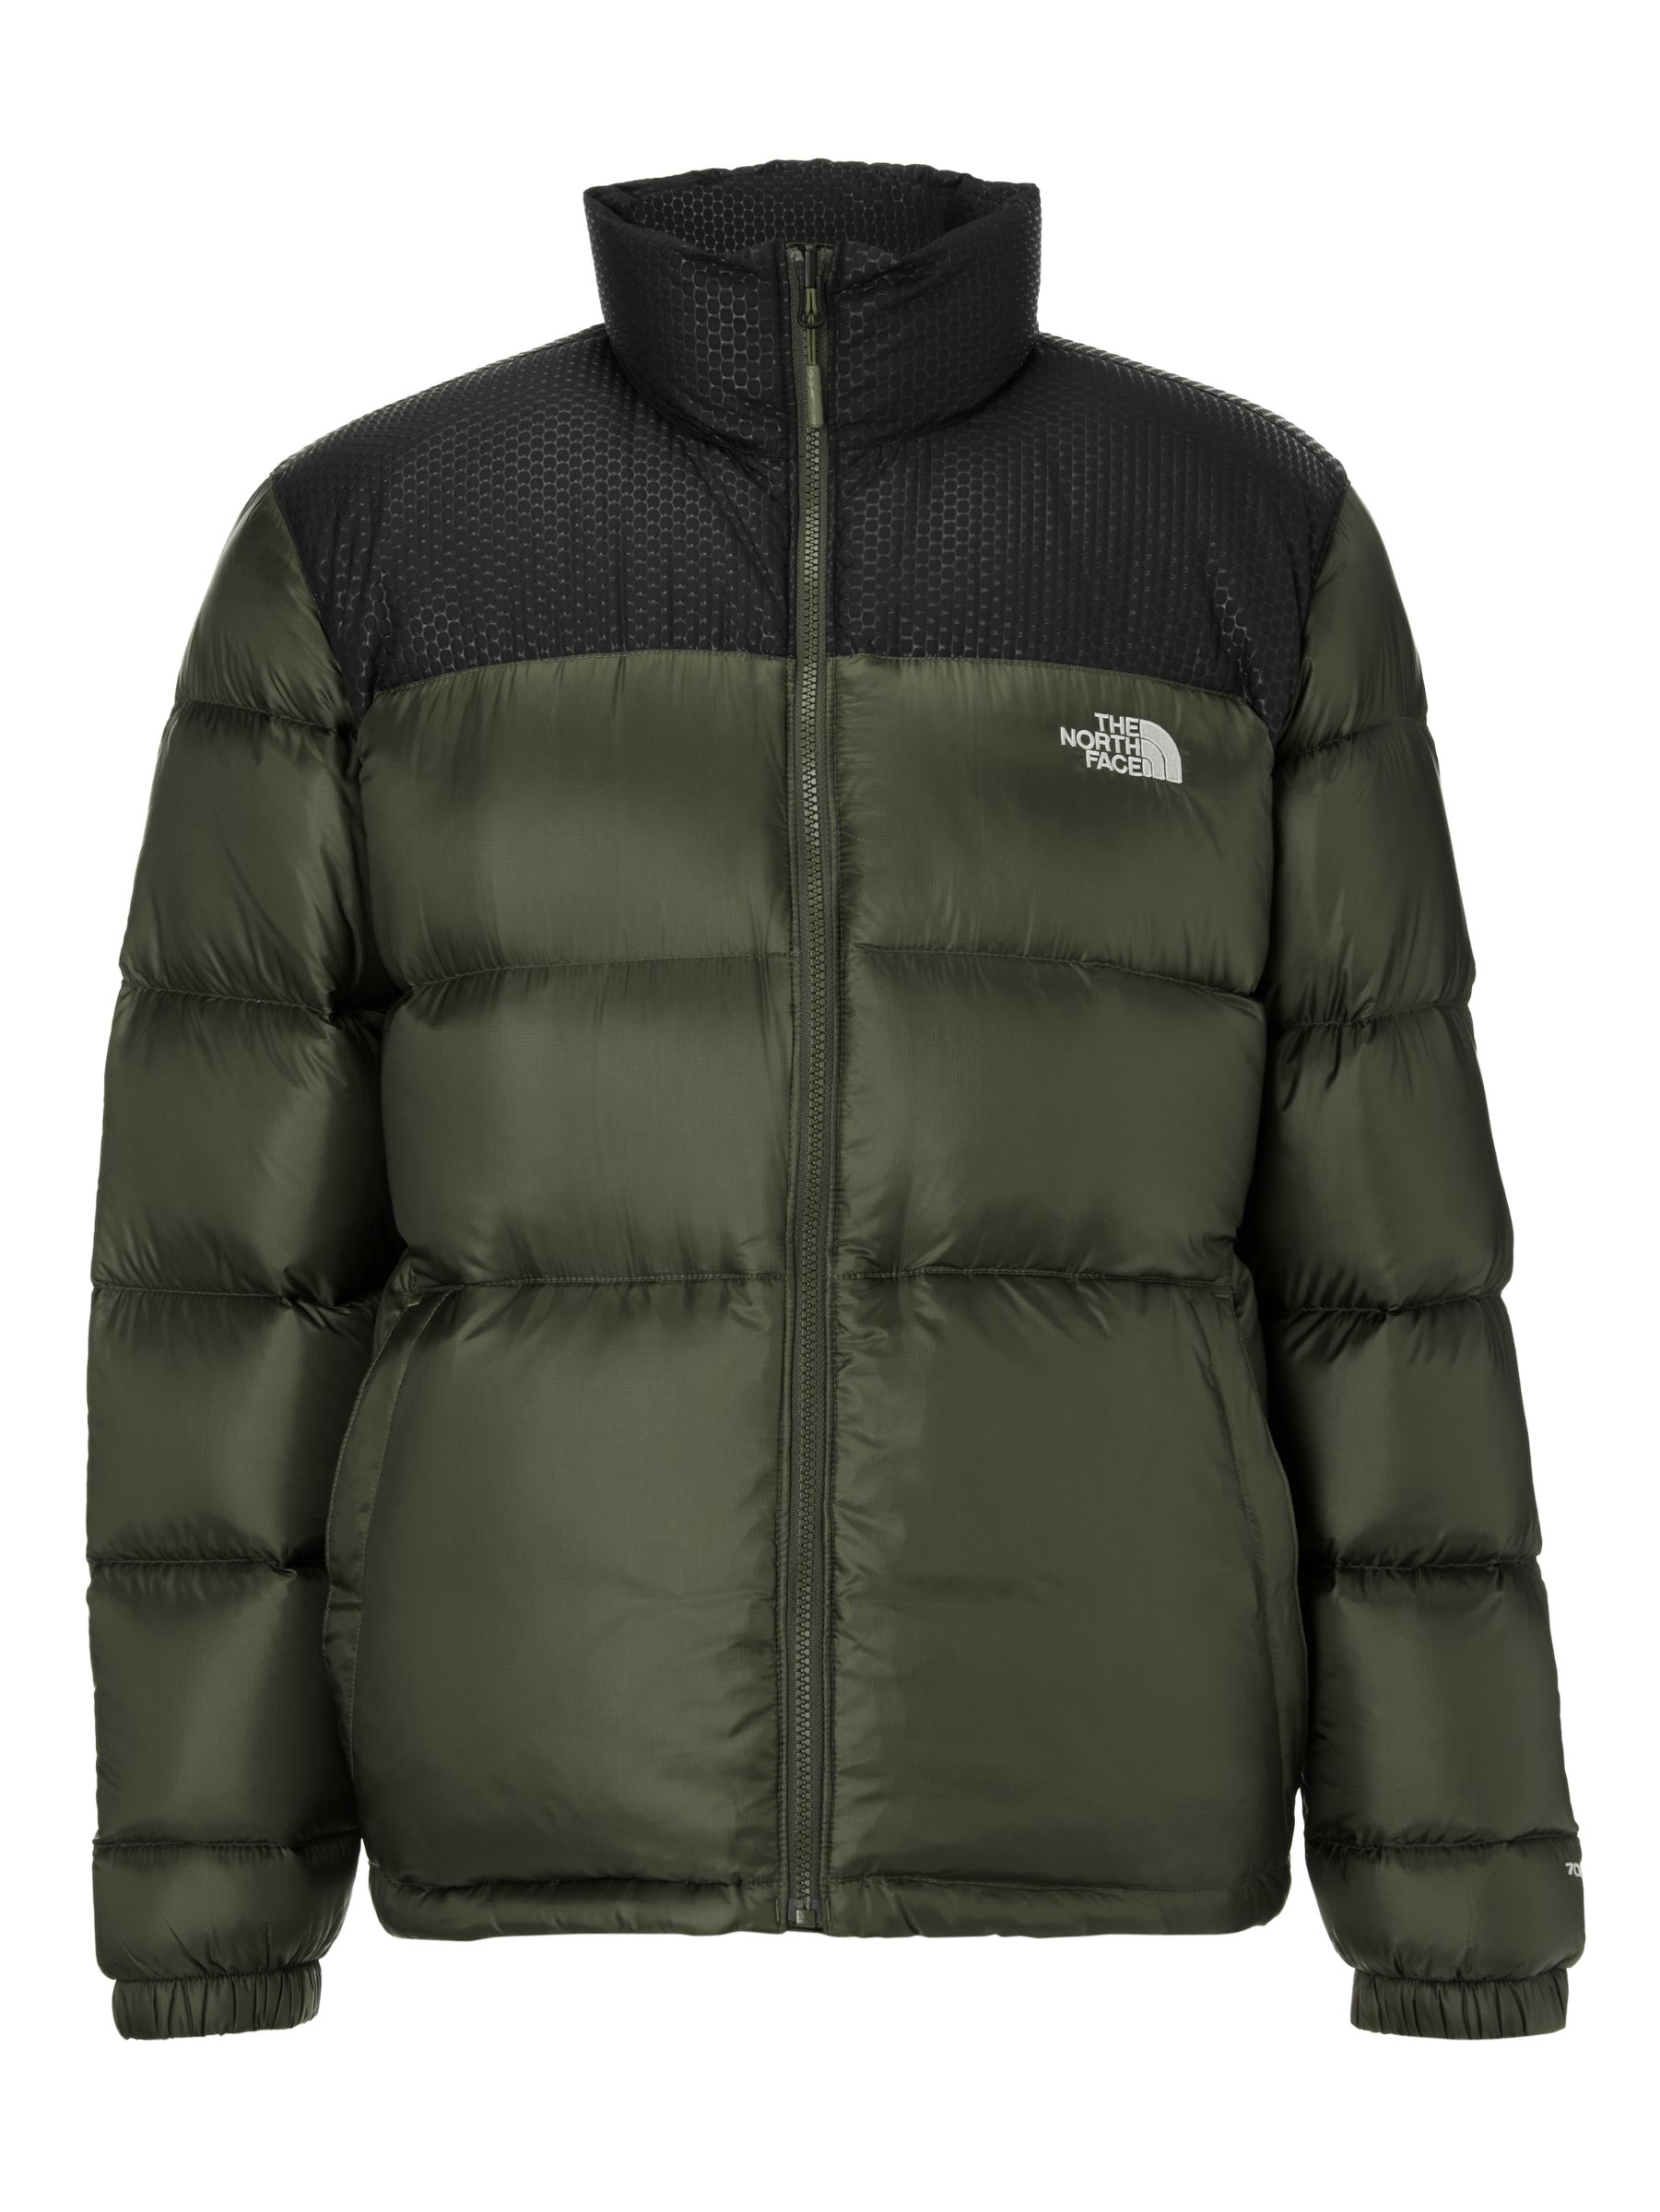 green and black north face jacket